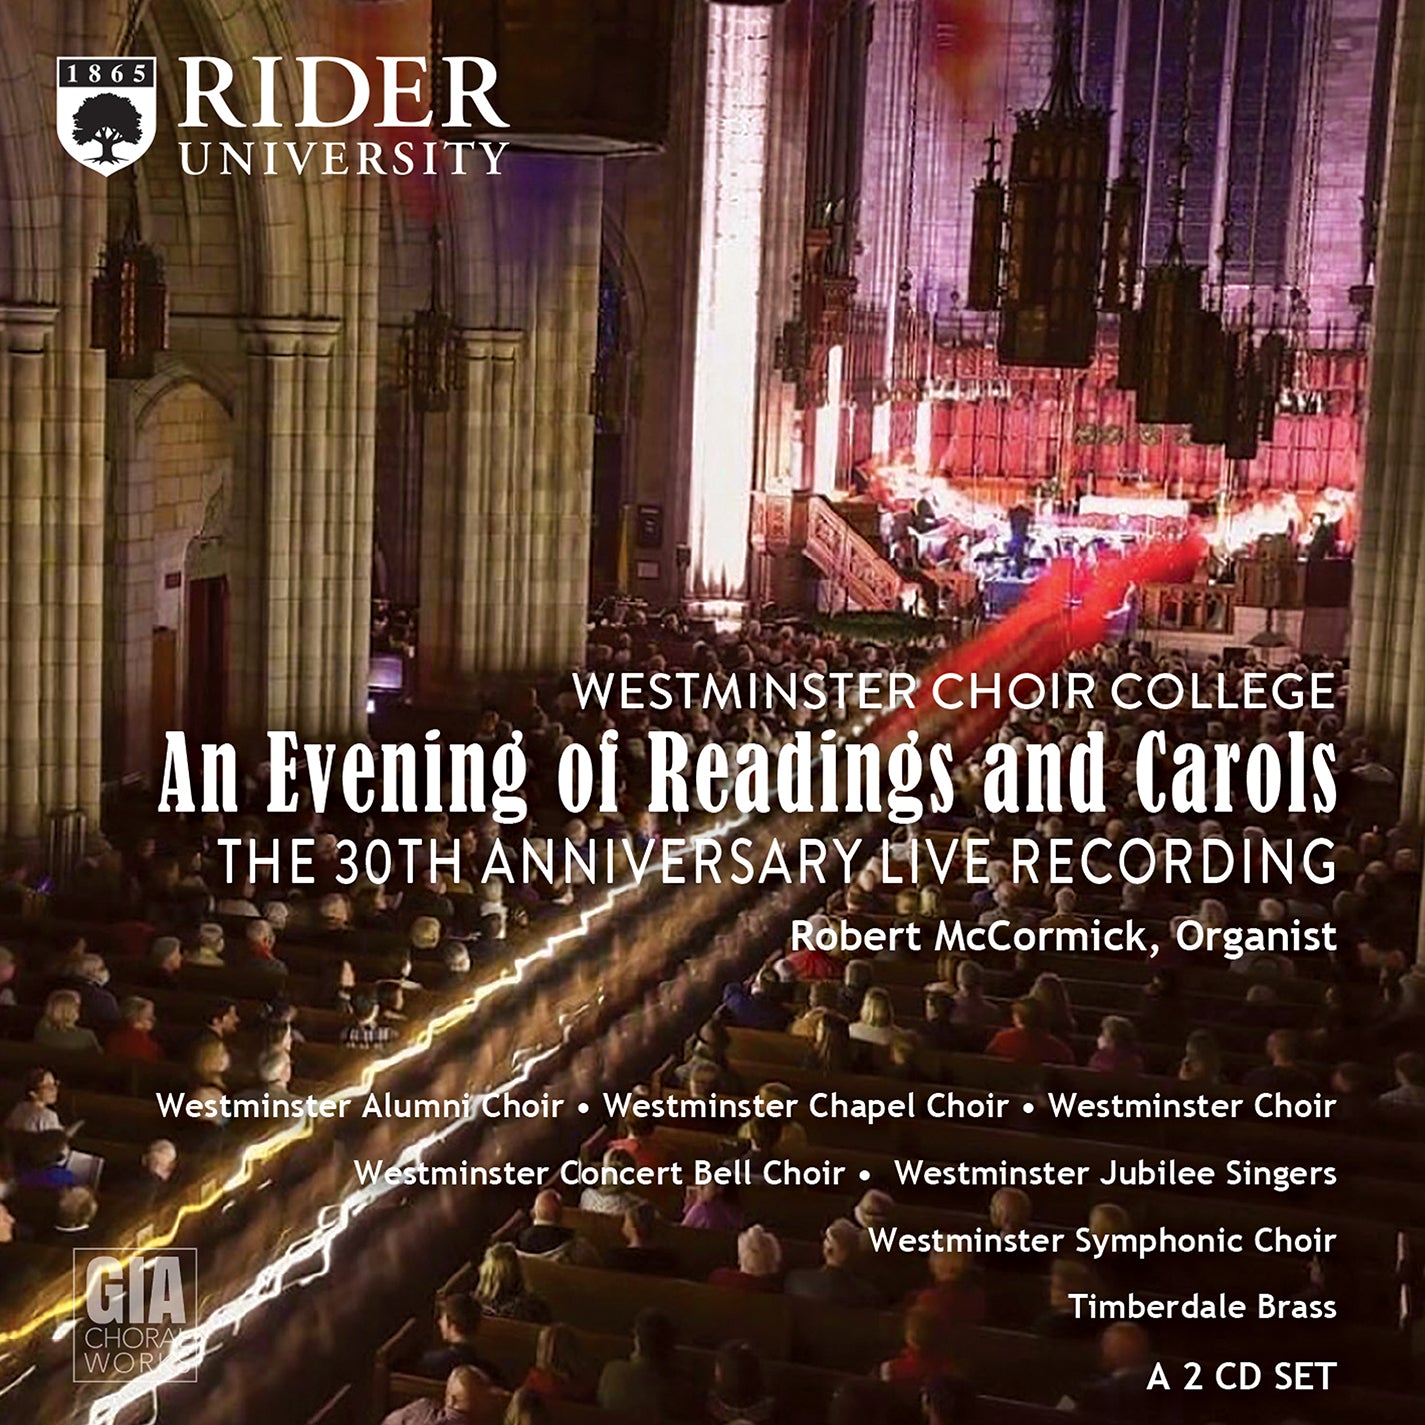 An Evening of Readings & Carols: The 30th Anniversary Live Recording